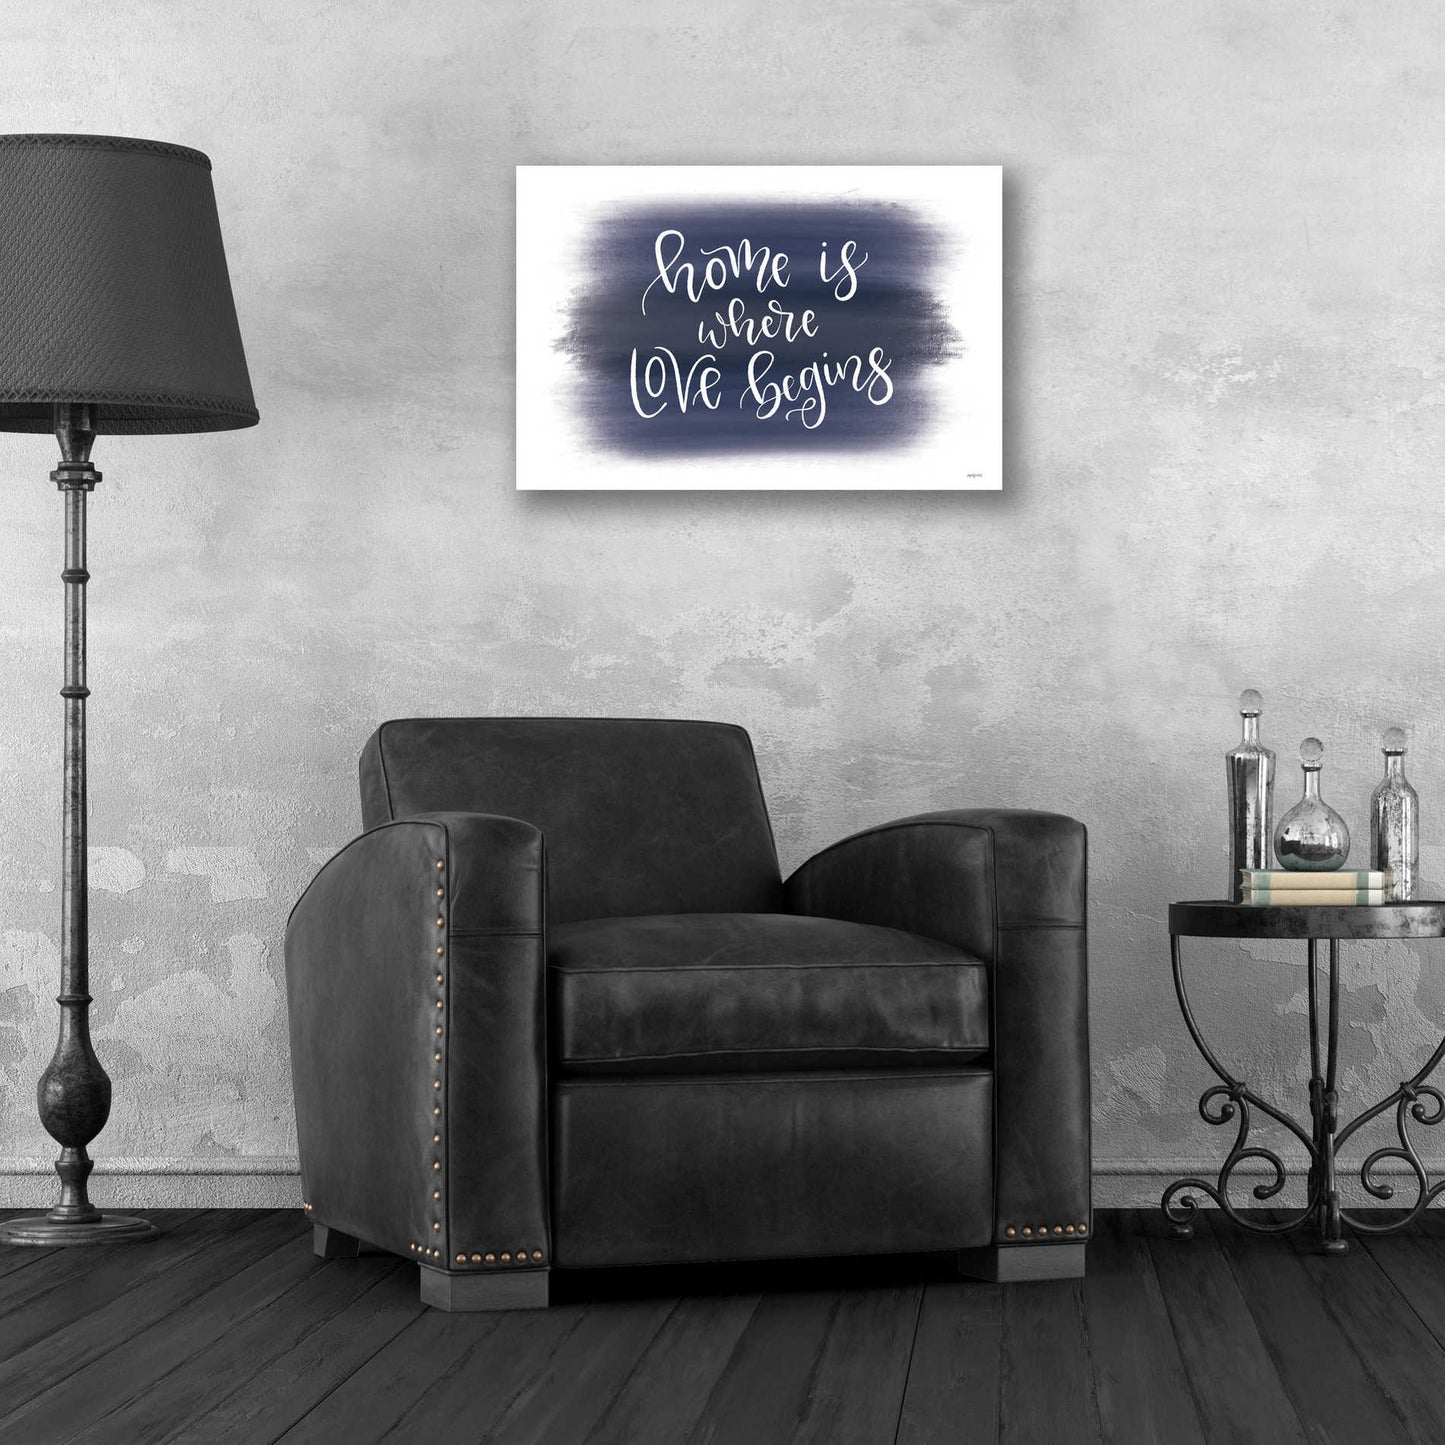 Epic Art 'Home is Where Love Begins' by Imperfect Dust, Acrylic Glass Wall Art,24x16